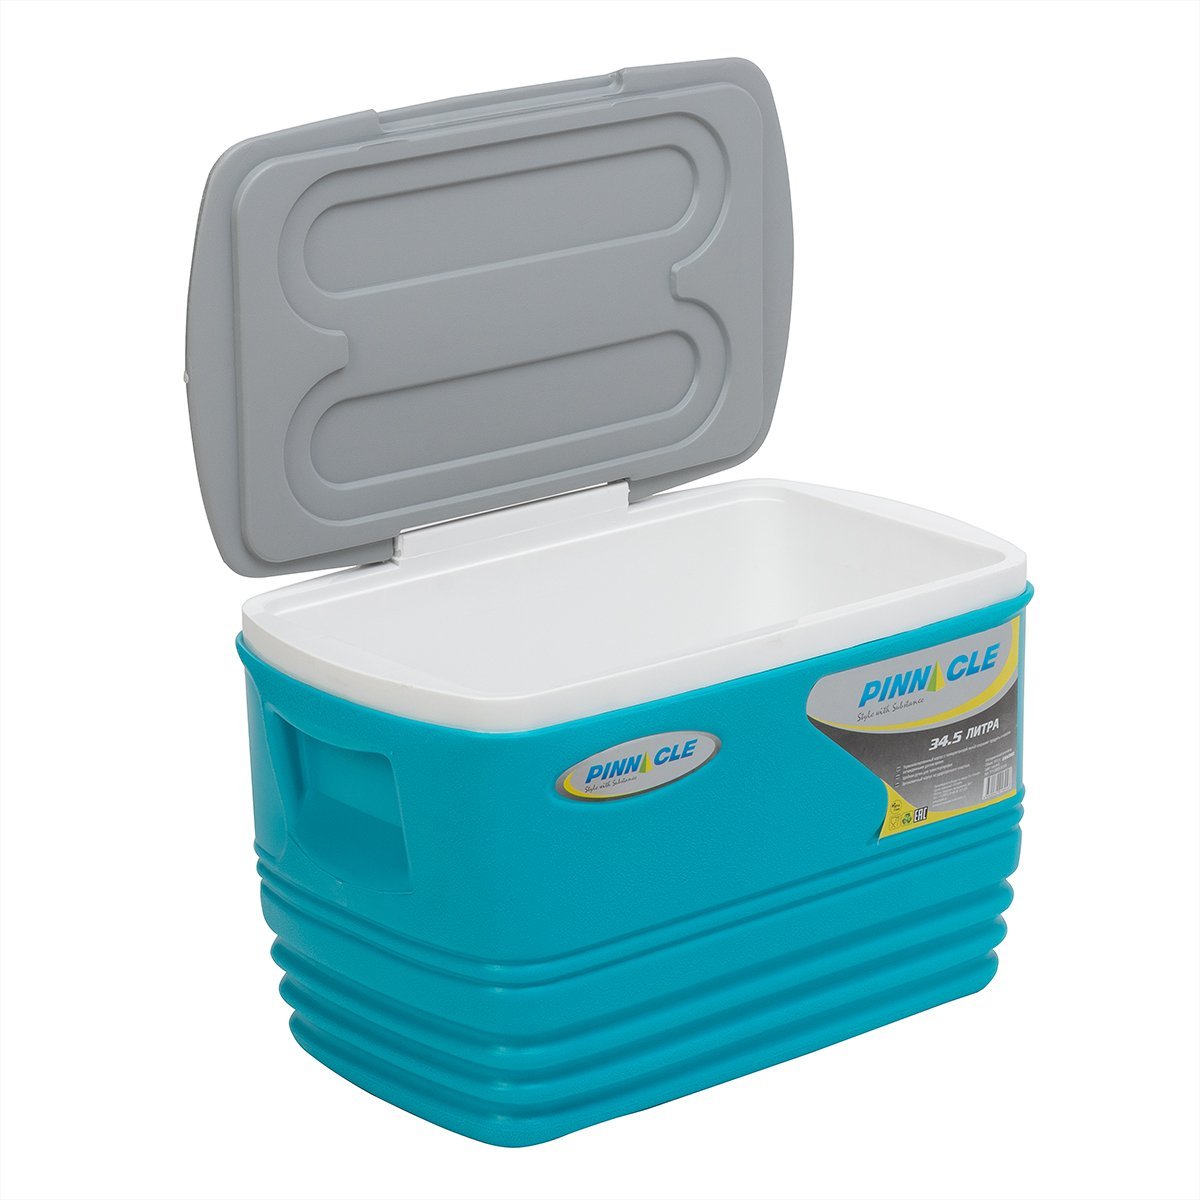 Eskimo Large Portable Camping Ice Chest, 36 qt with a lid widely open